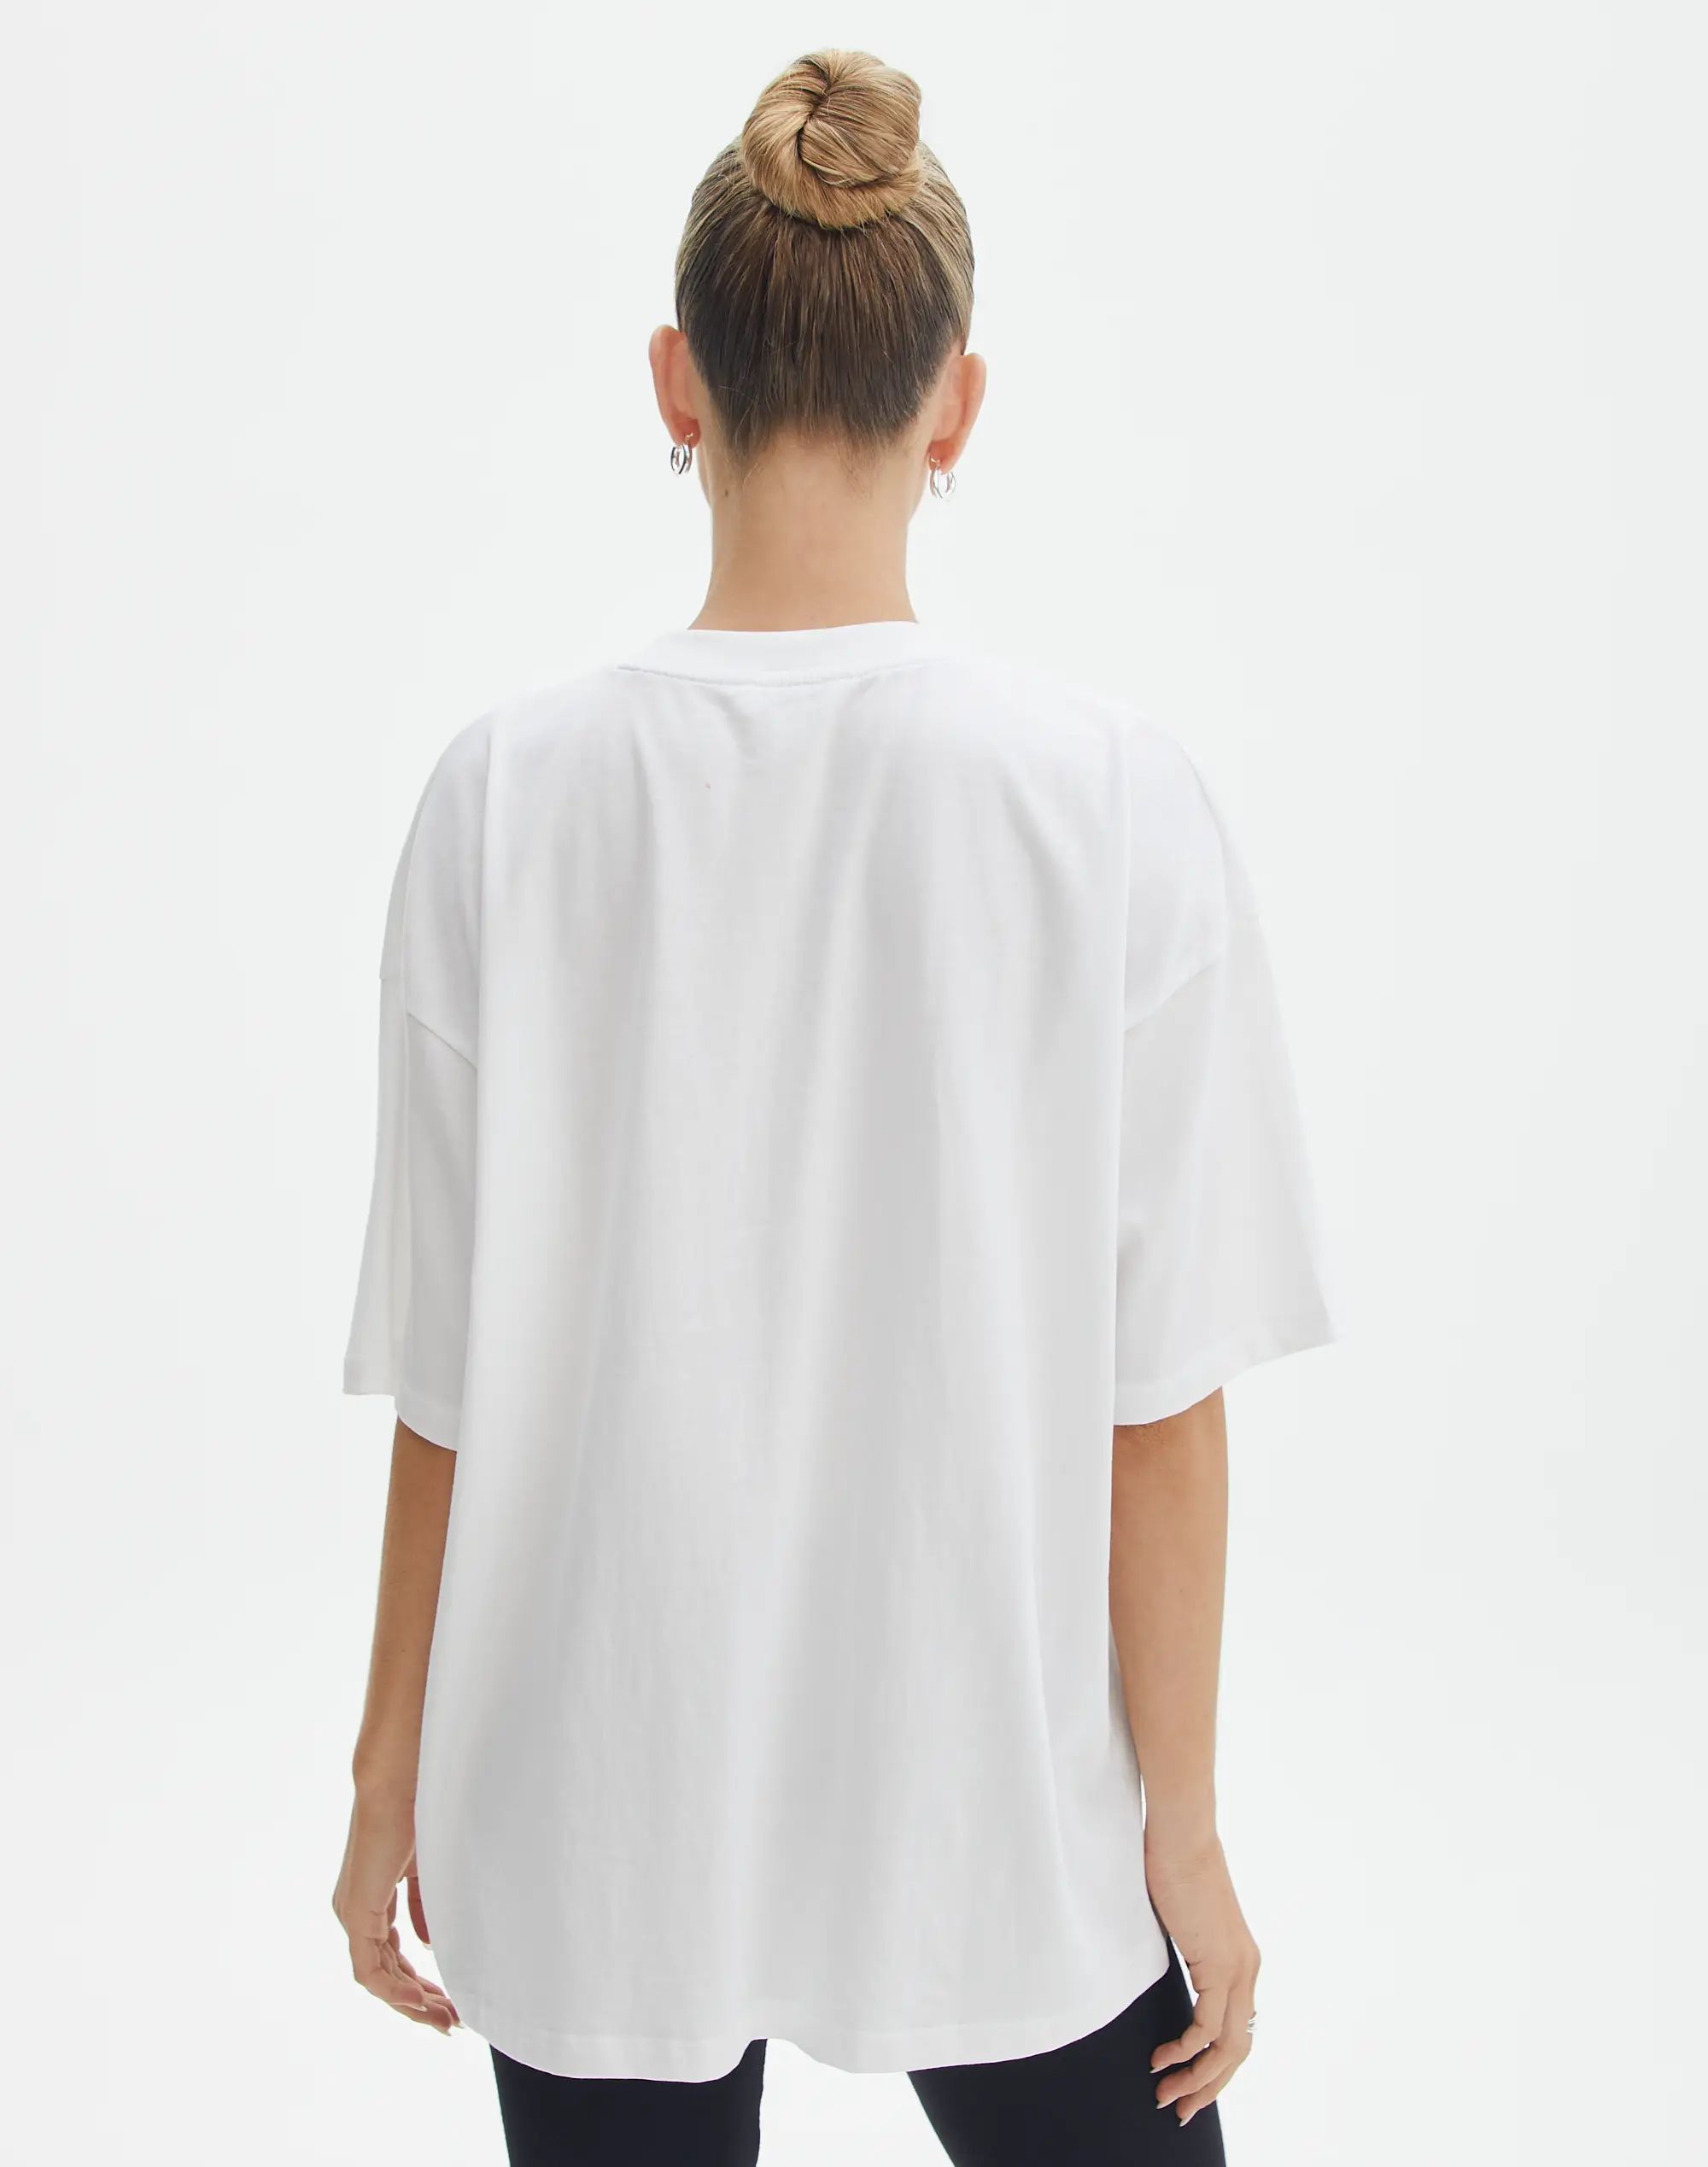 Oversized Baggy Tee in White | Glassons | Glassons (Australia)